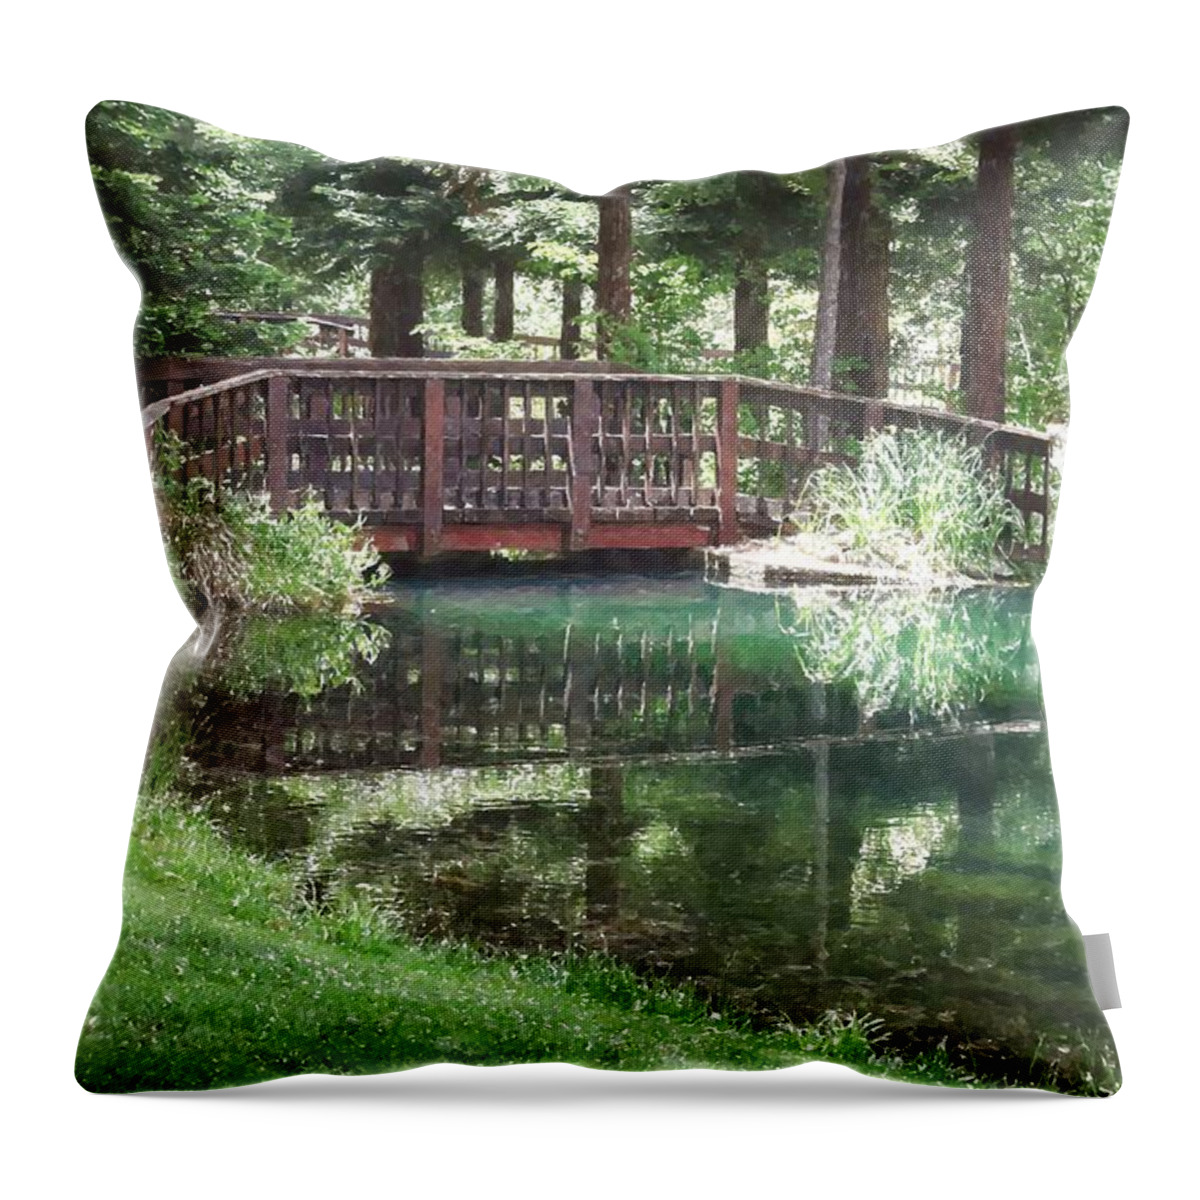 The Pond Bridge Throw Pillow featuring the photograph Bridge Pond Watercolor by Frank Wilson